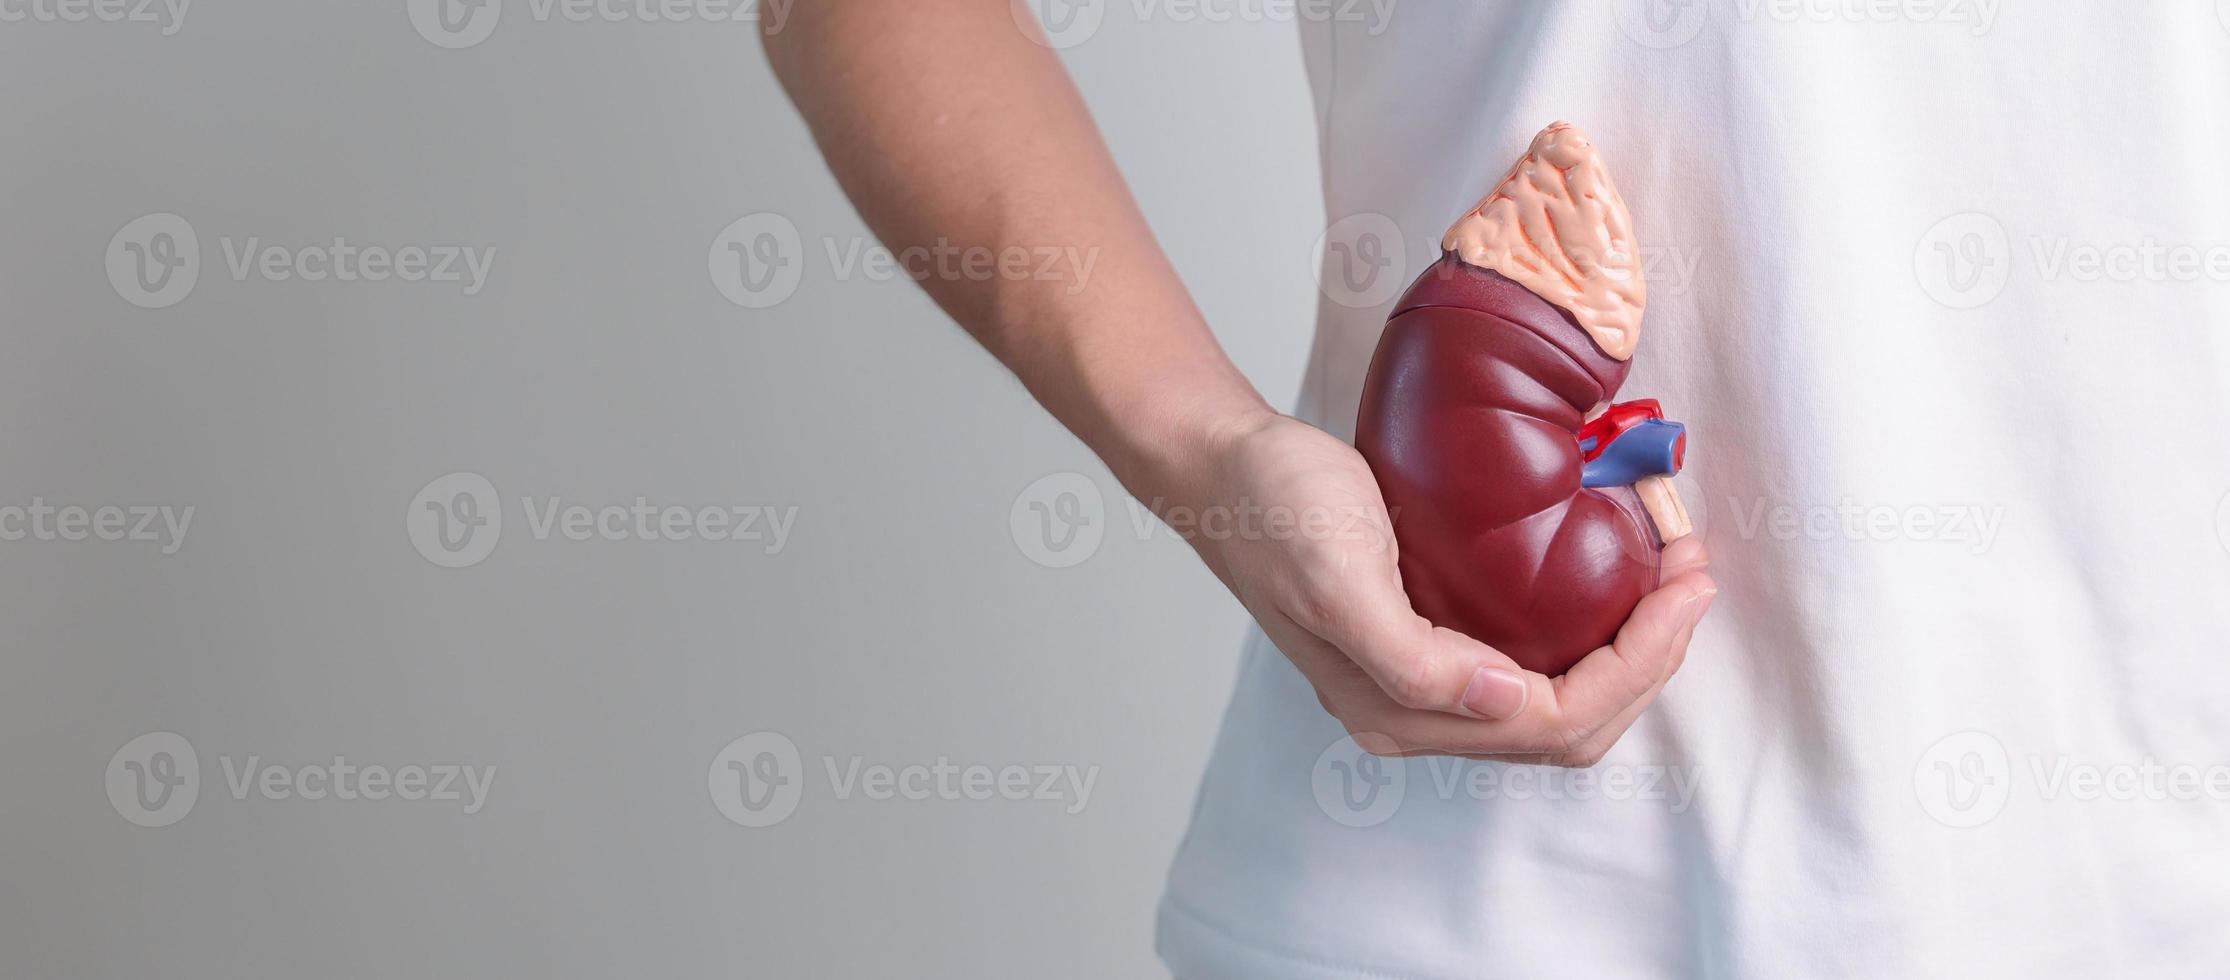 woman holding Anatomical human kidney Adrenal gland model. disease of Urinary system and Stones, Cancer, world kidney day, Chronic kidney and Organ Donor Day concept photo